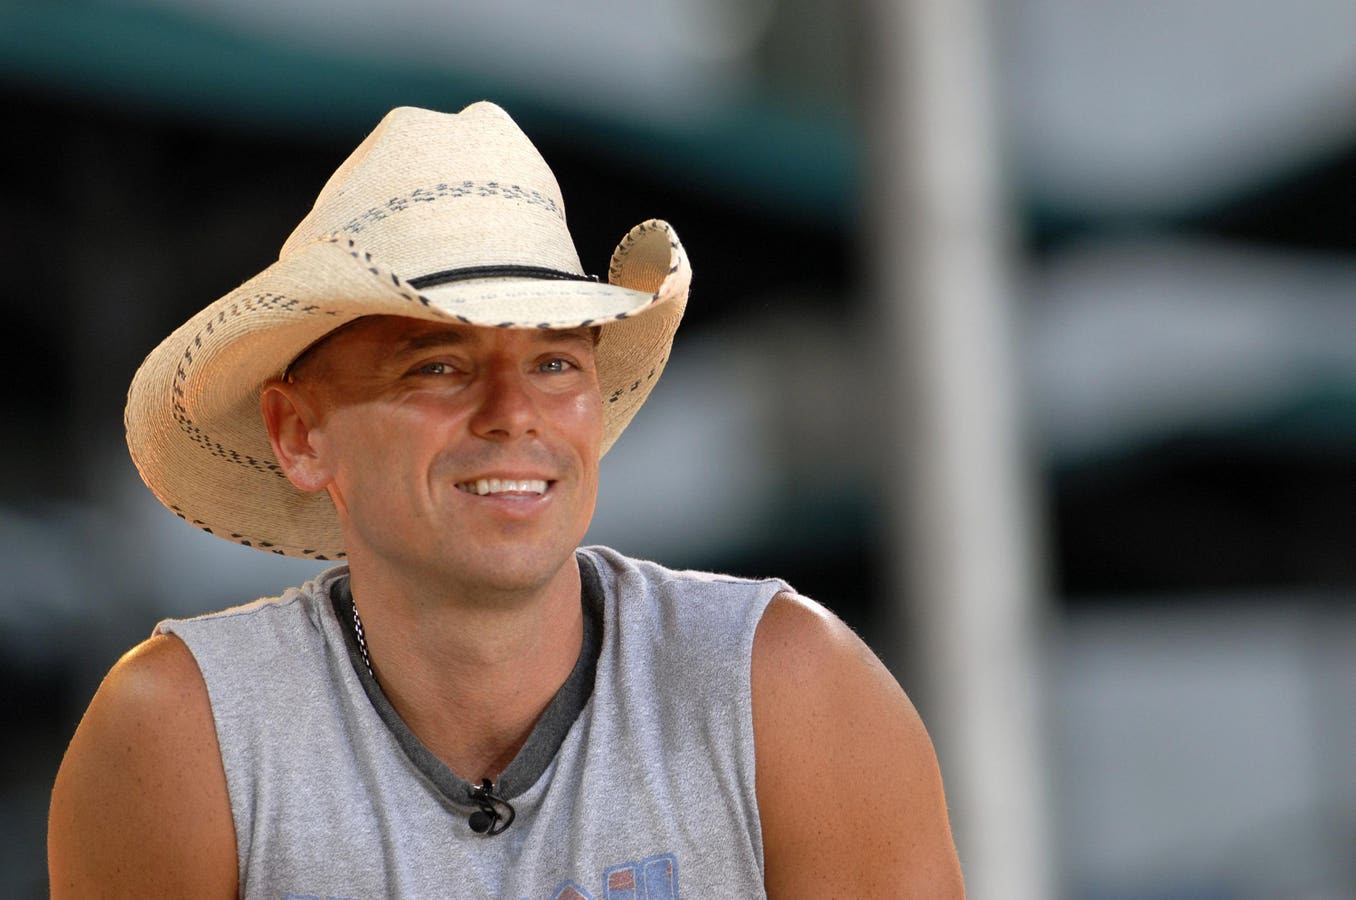 Kenny Chesney Ties One Of Country’s Greatest Stars For A Very Important Record